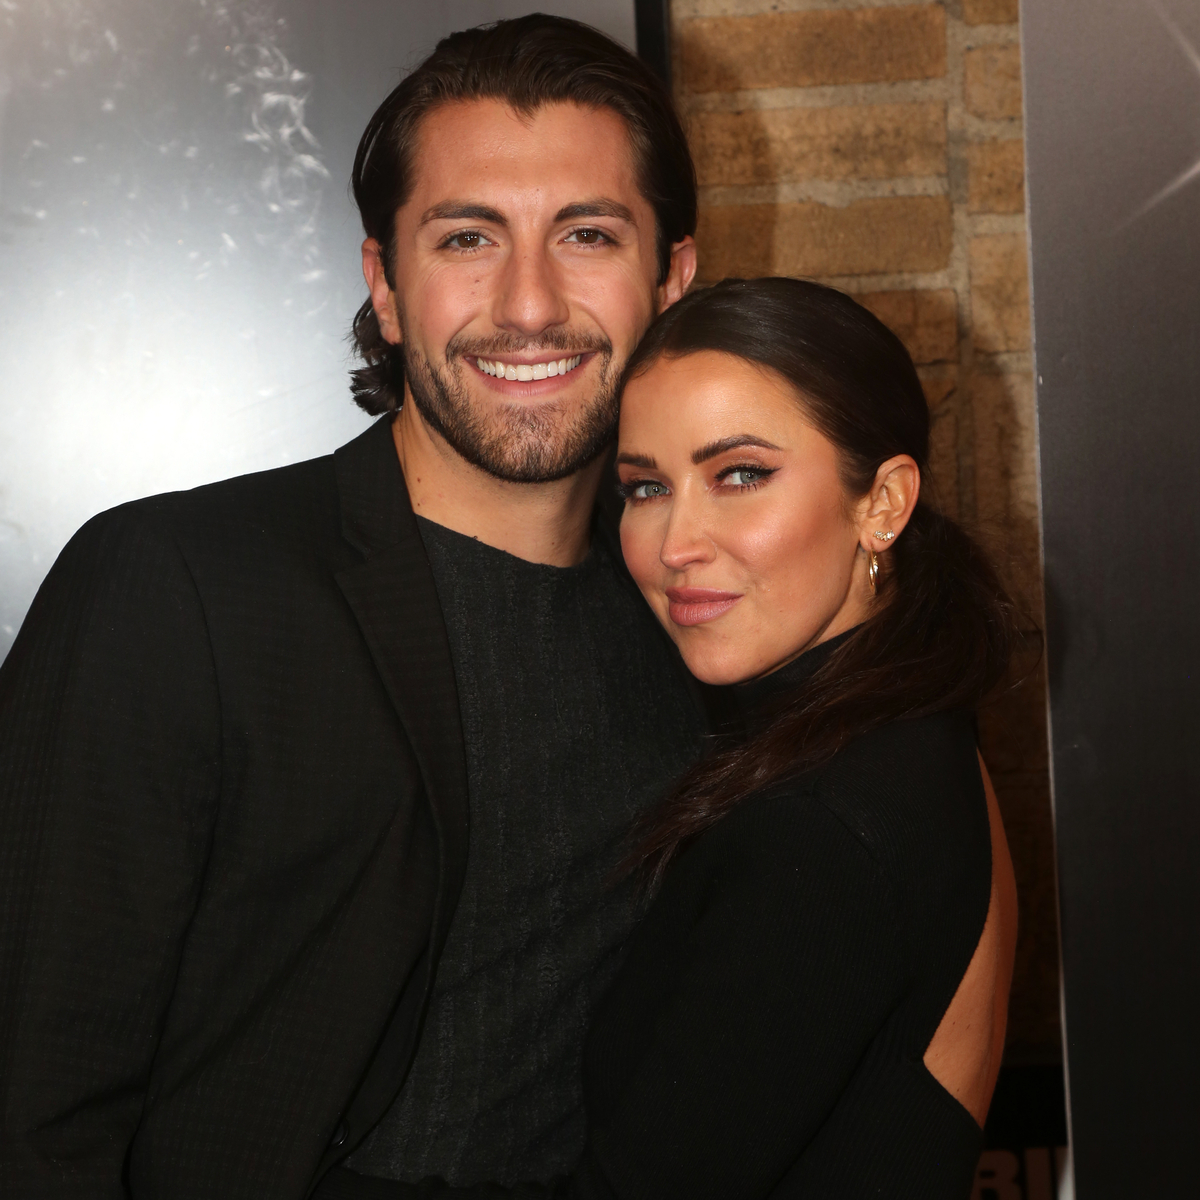 Kaitlyn Bristowe Calls Out Ex Jason Tartick for “Victim Mentality”